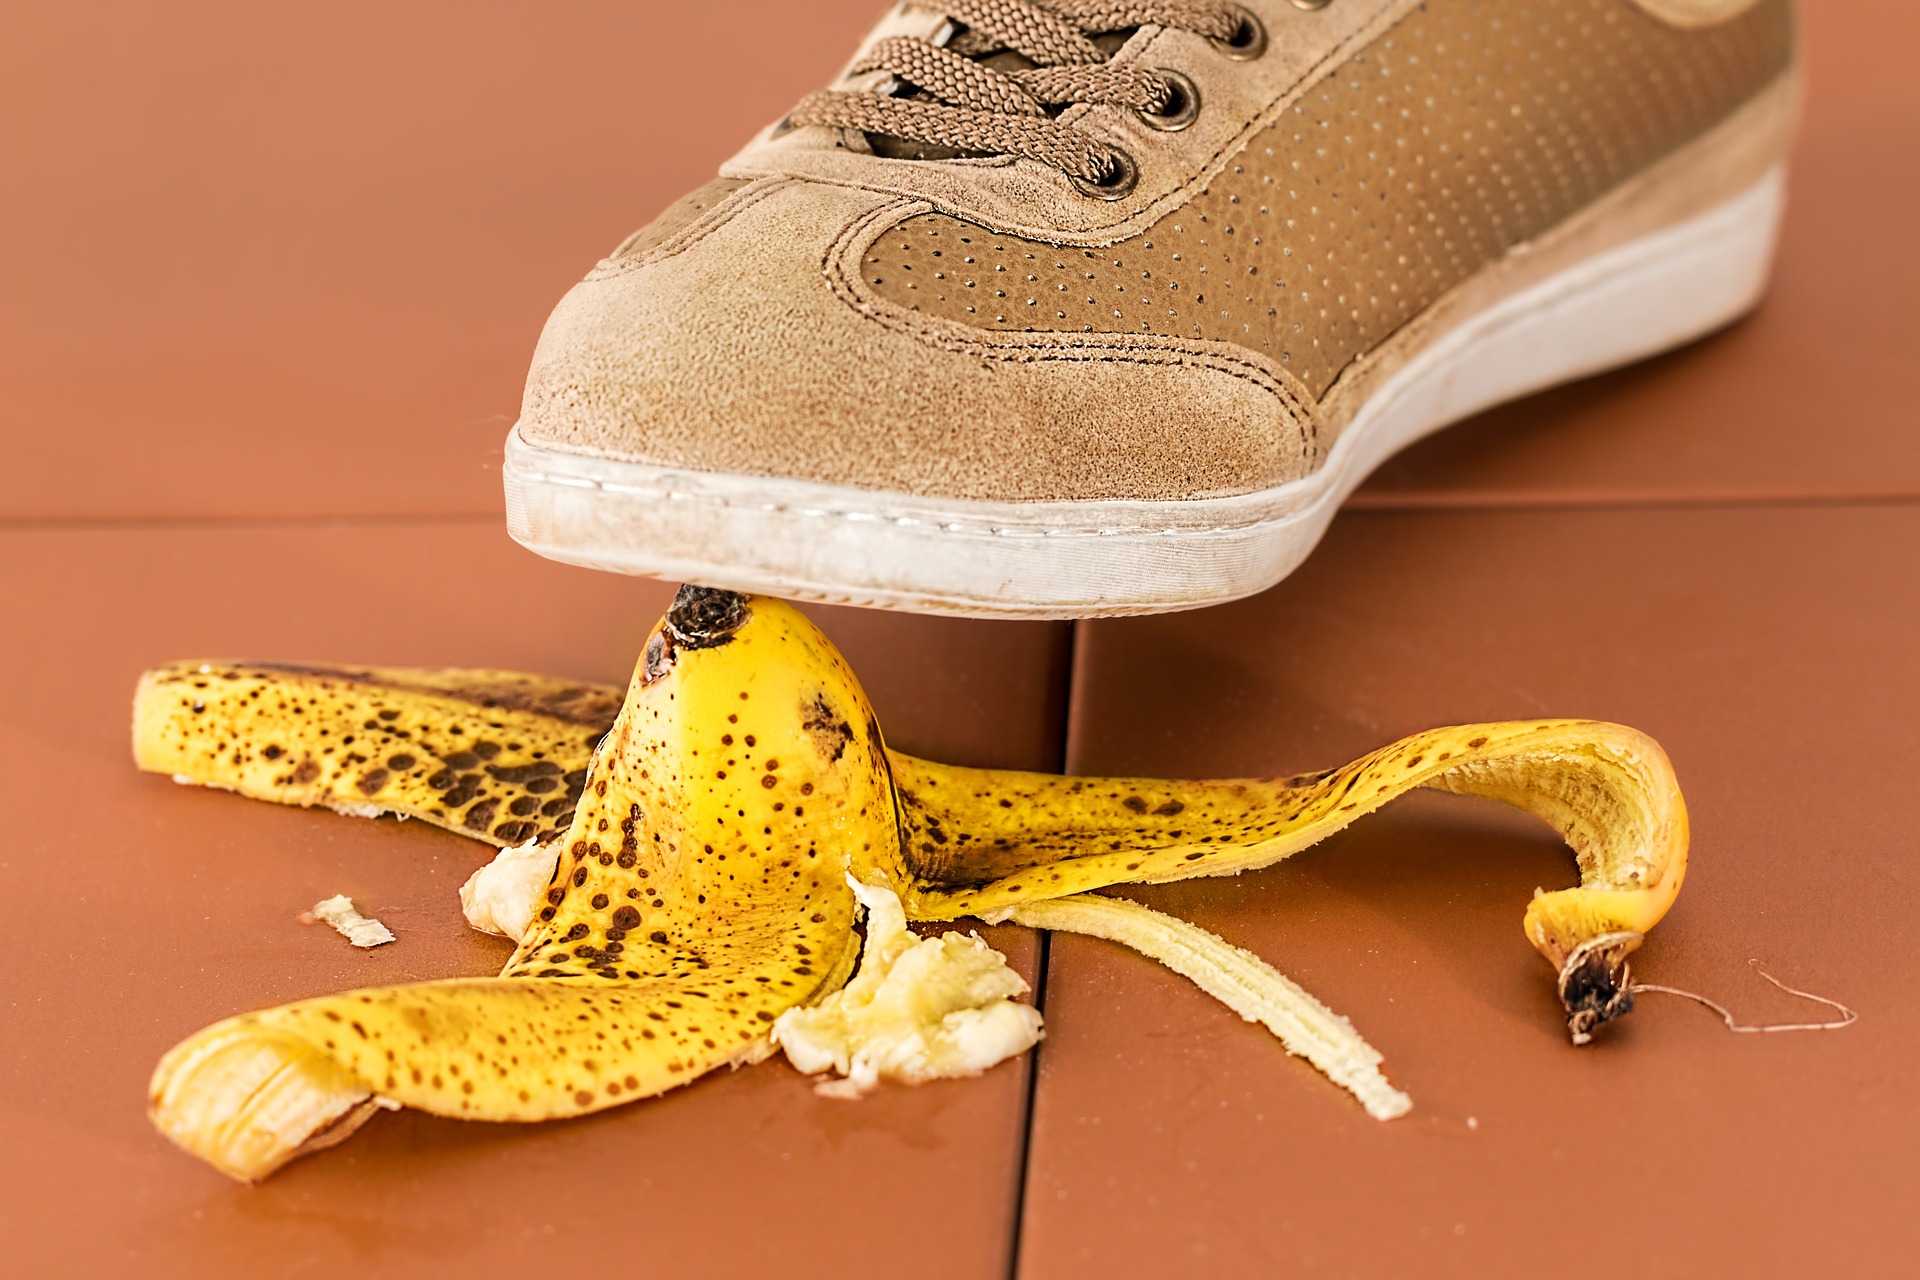 A shoe coming down on a banana peel, published to: 